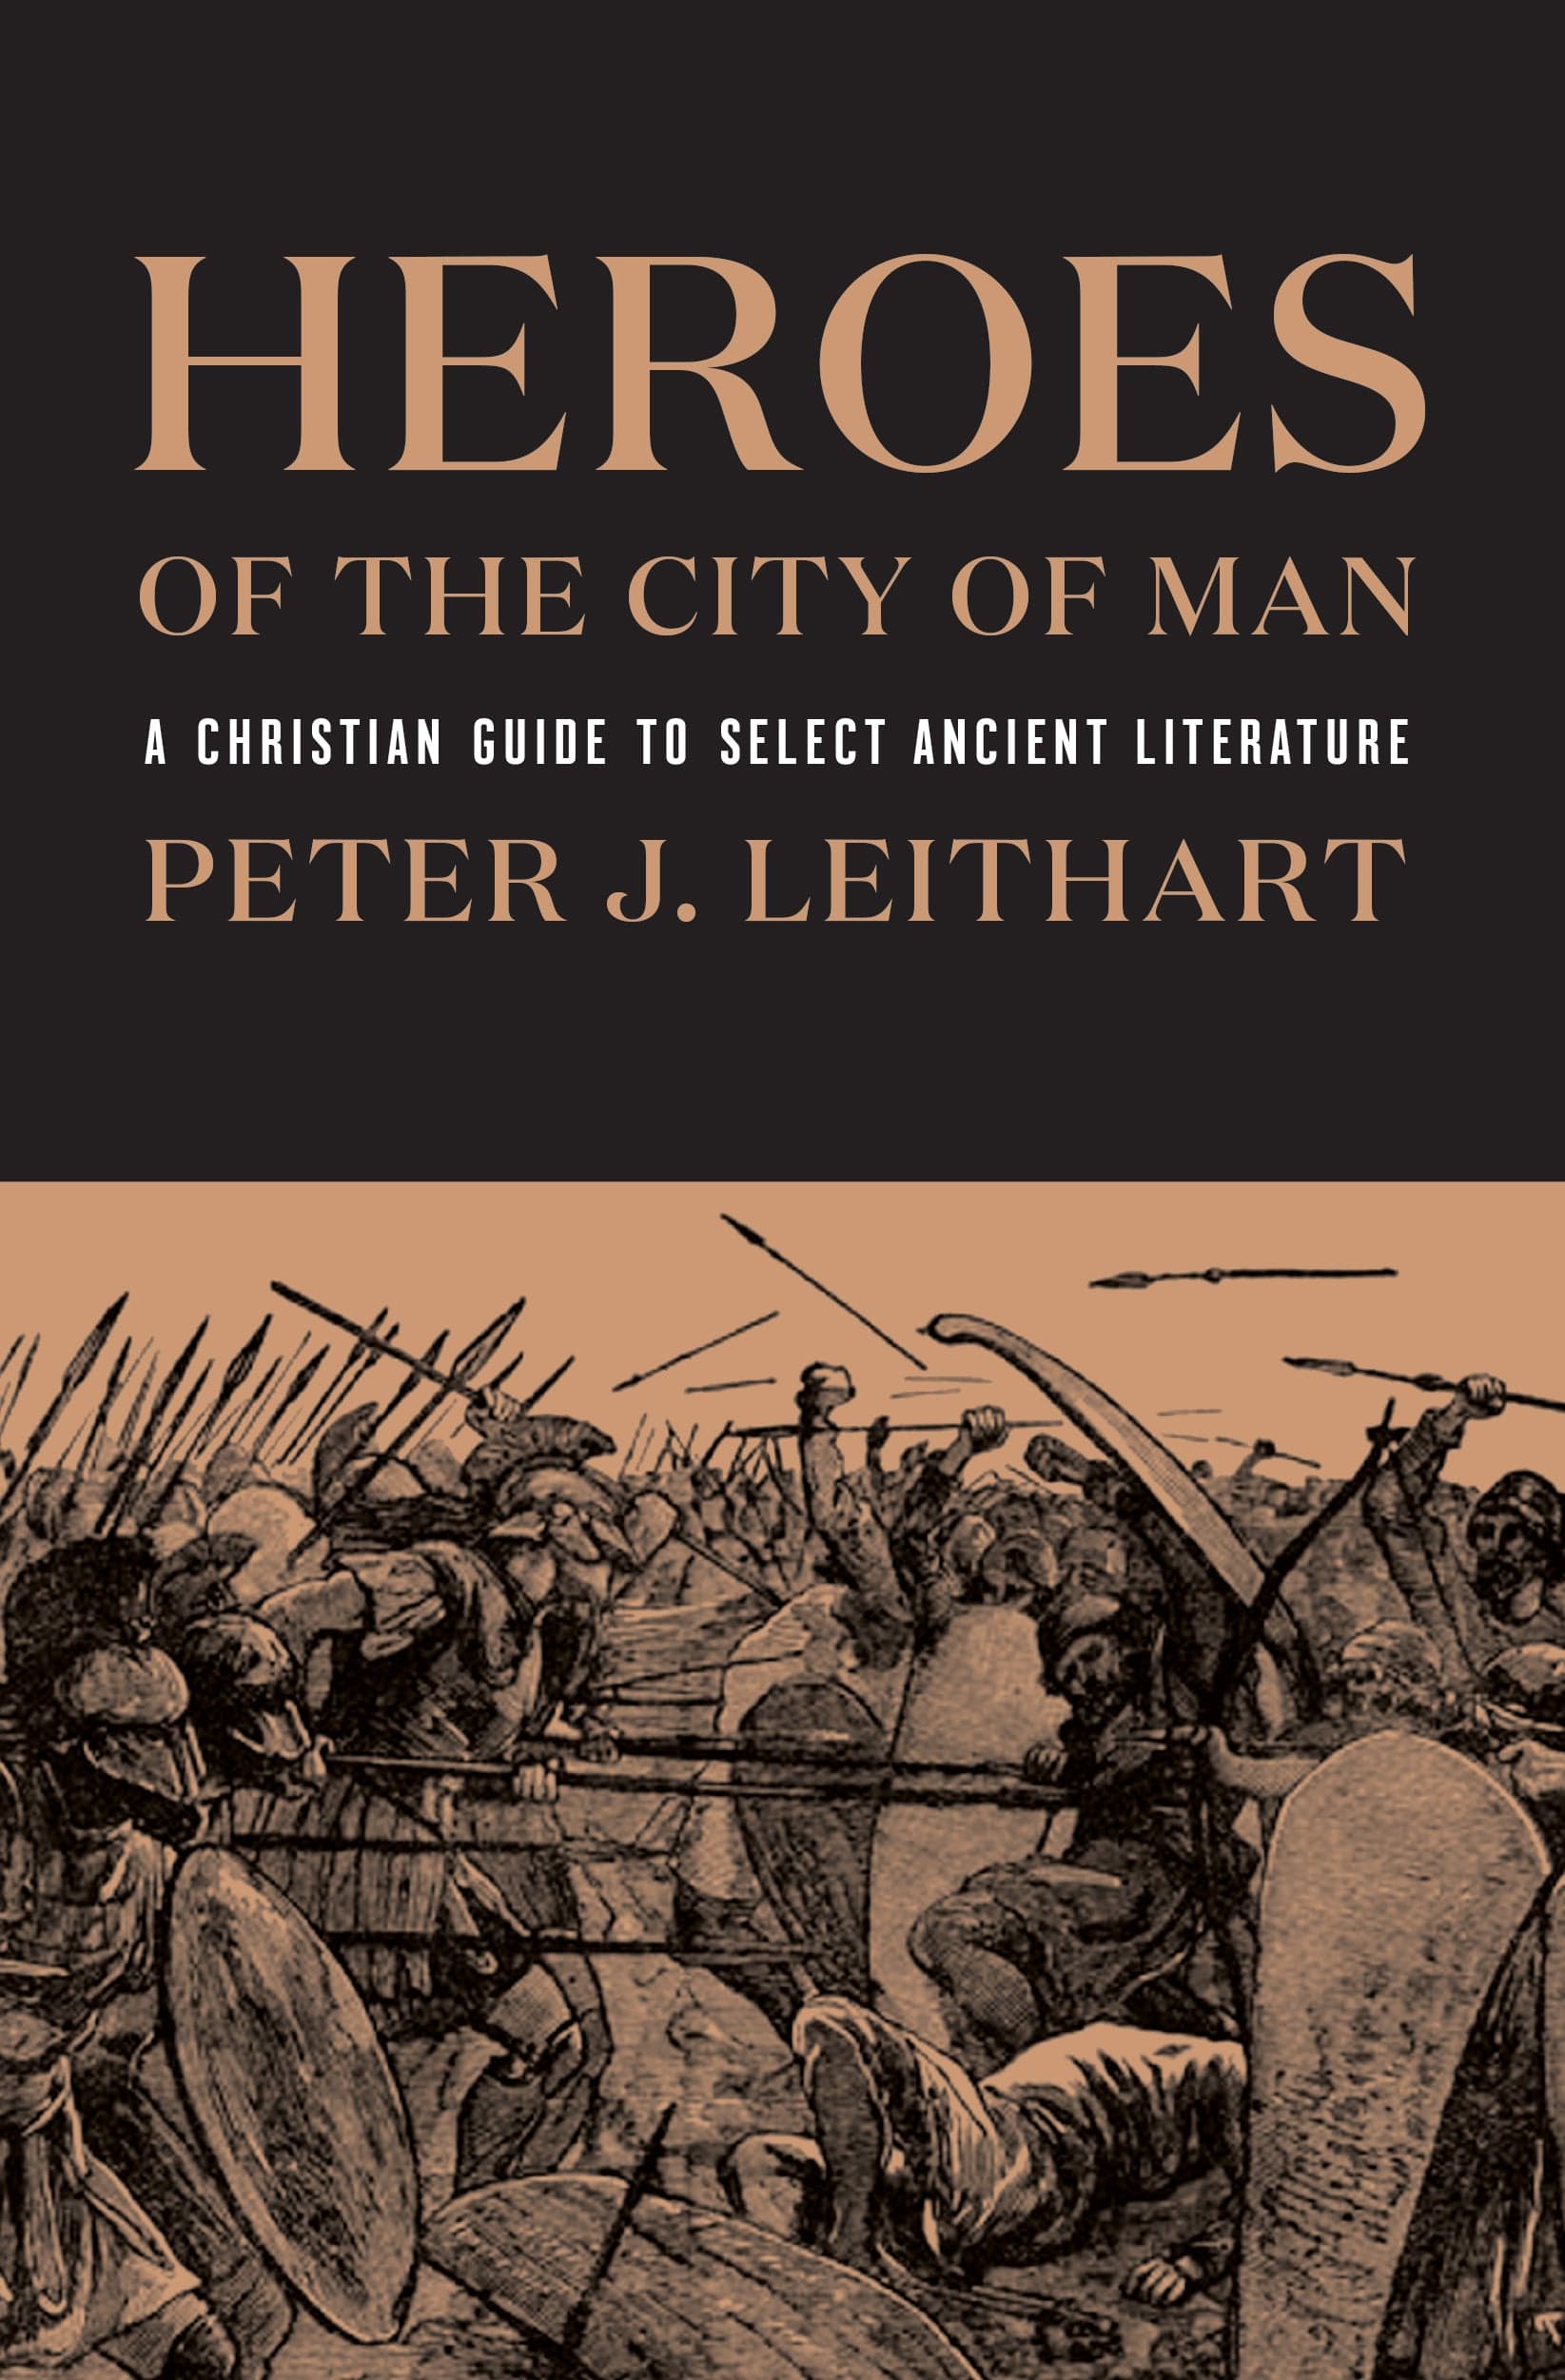 Heroes of the City of Man: A Christian Guide to Select Ancient Literature